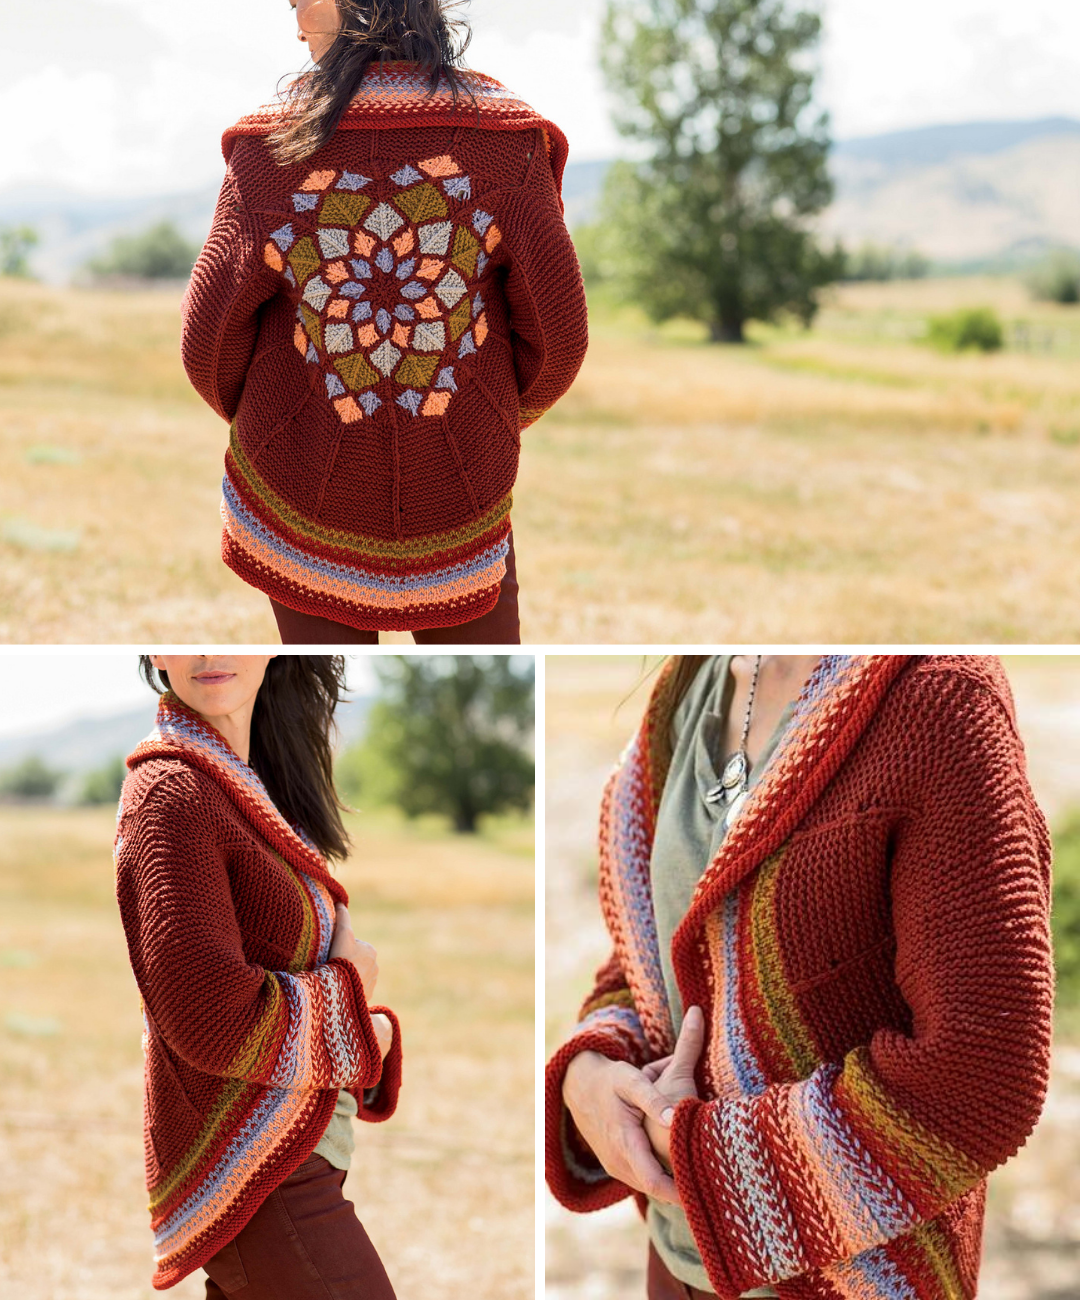 3 views of a circular handknit cardigan featuring wide, striped sleeves and a multicolor dreamcatcher design on the back